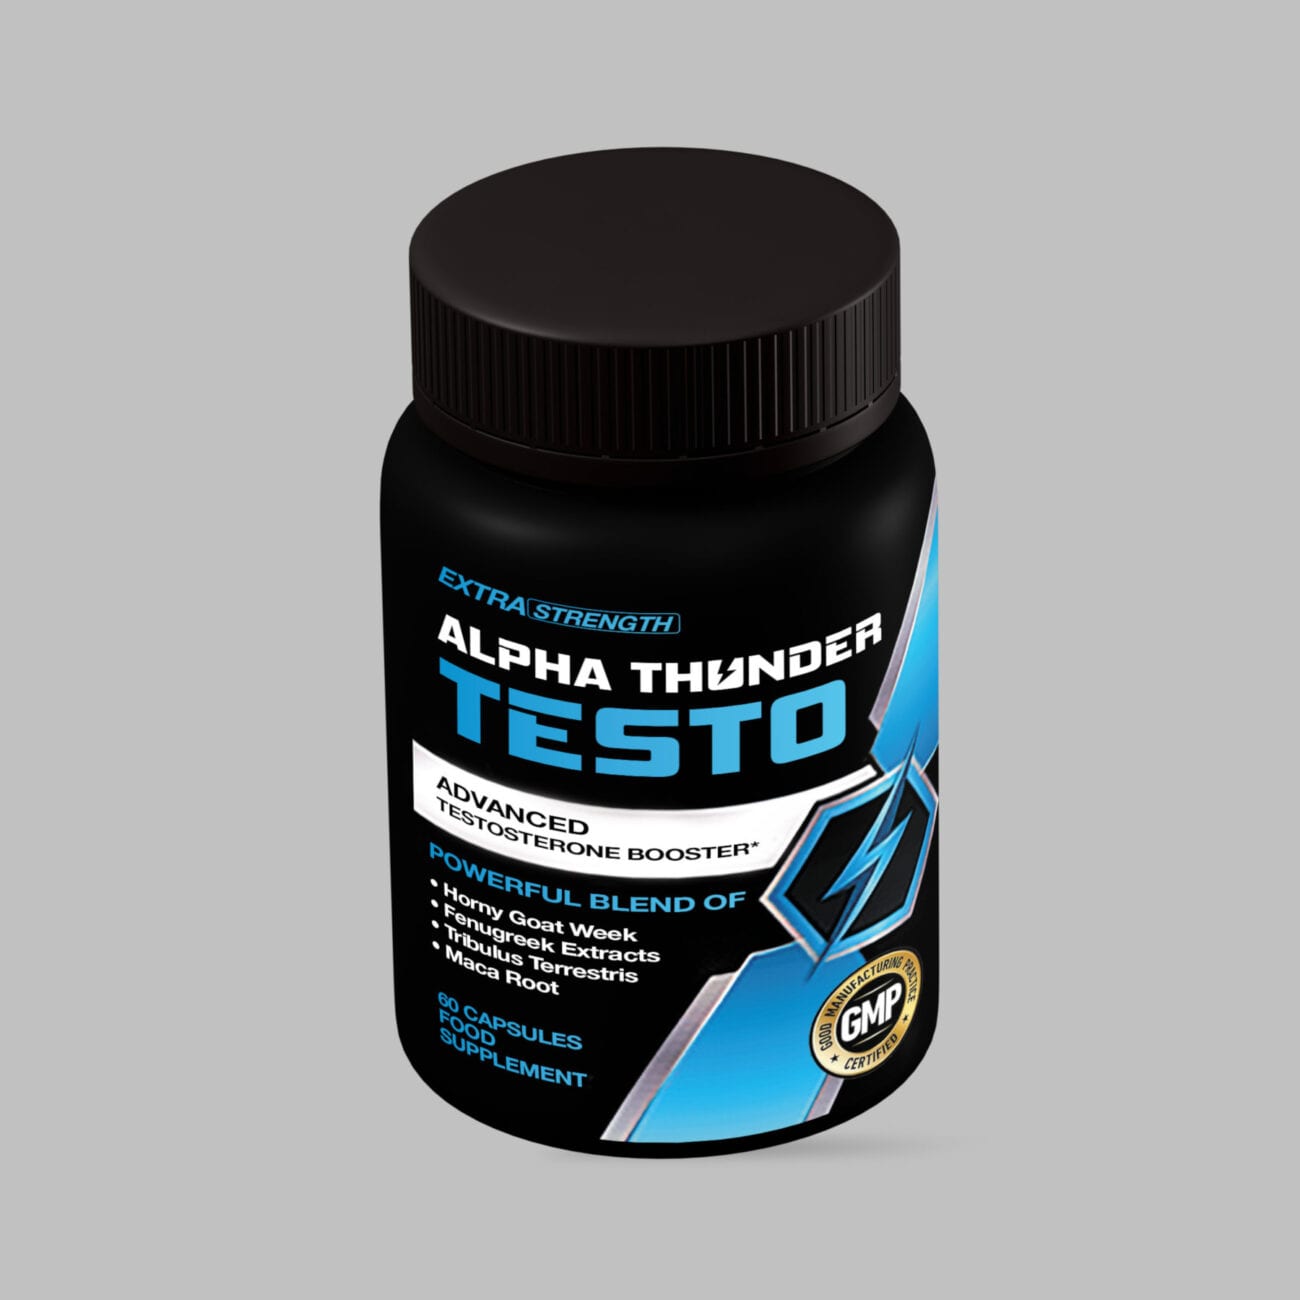 Testosterone sharply decreases after forty, but there are ways to keep your youthful vigor around. See if Alpha Thunder Testo is right for you.